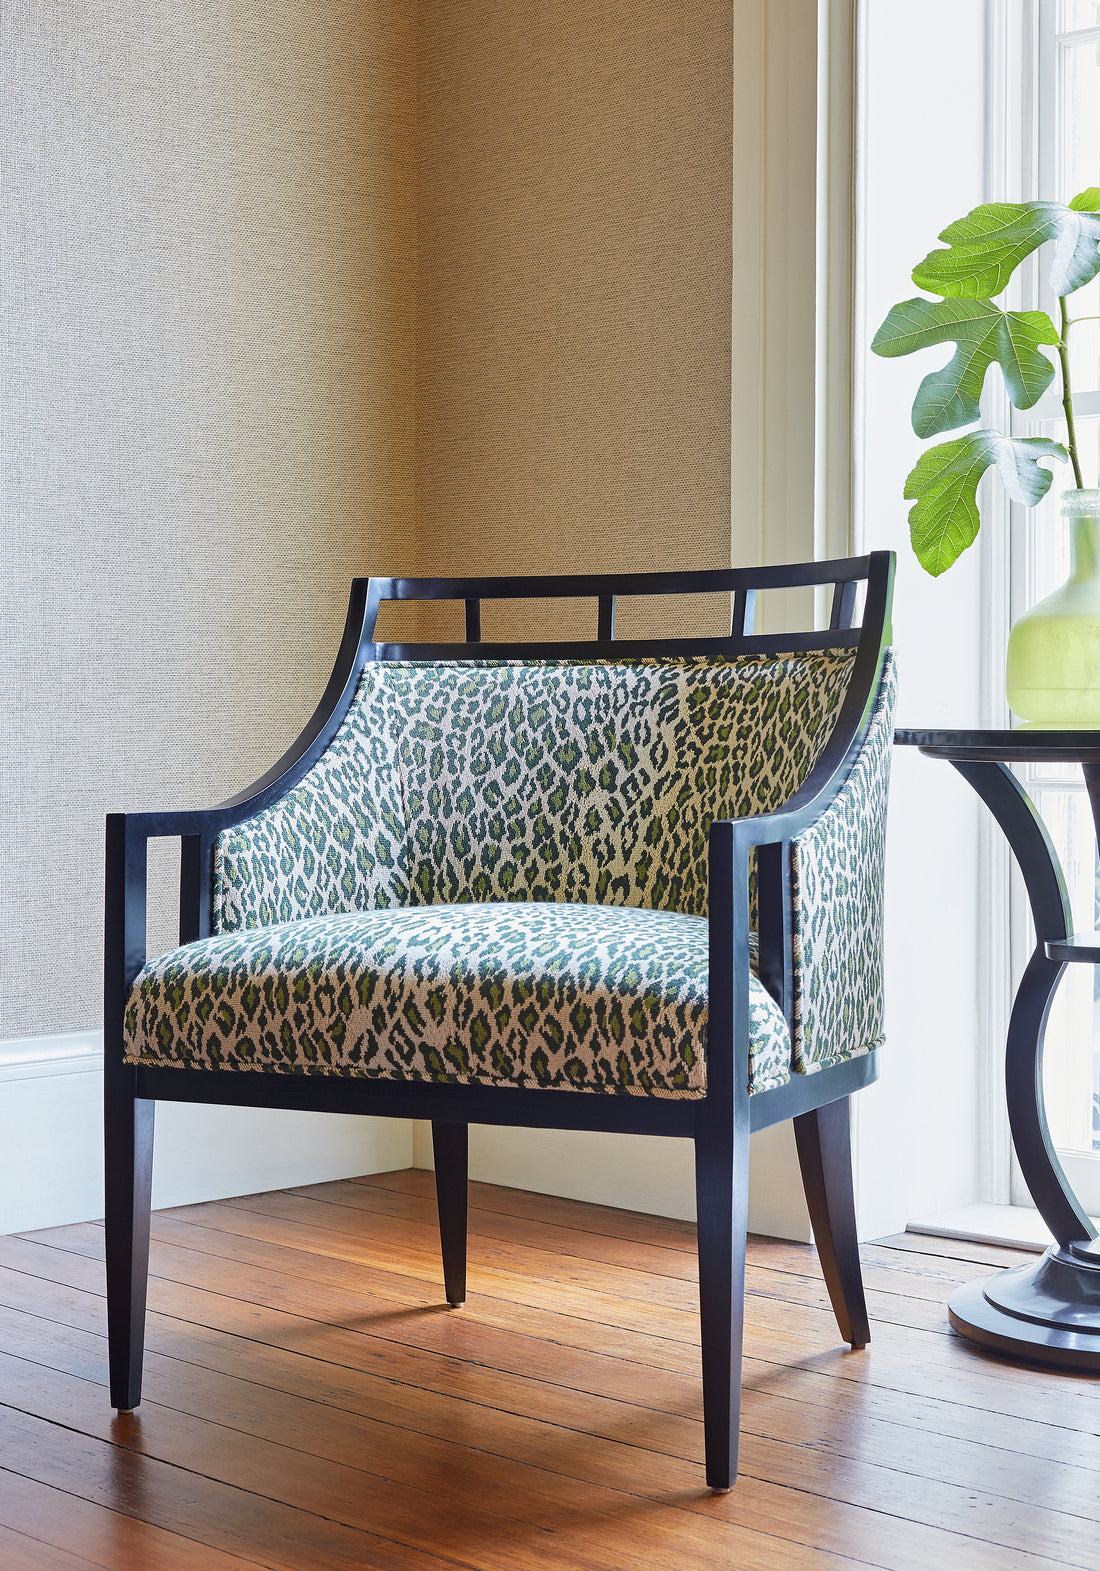 Malibu Chair in Amur woven fabric in emerald green color - pattern number W80433 - by Thibaut in the Woven Resource Vol 10 Menagerie collection